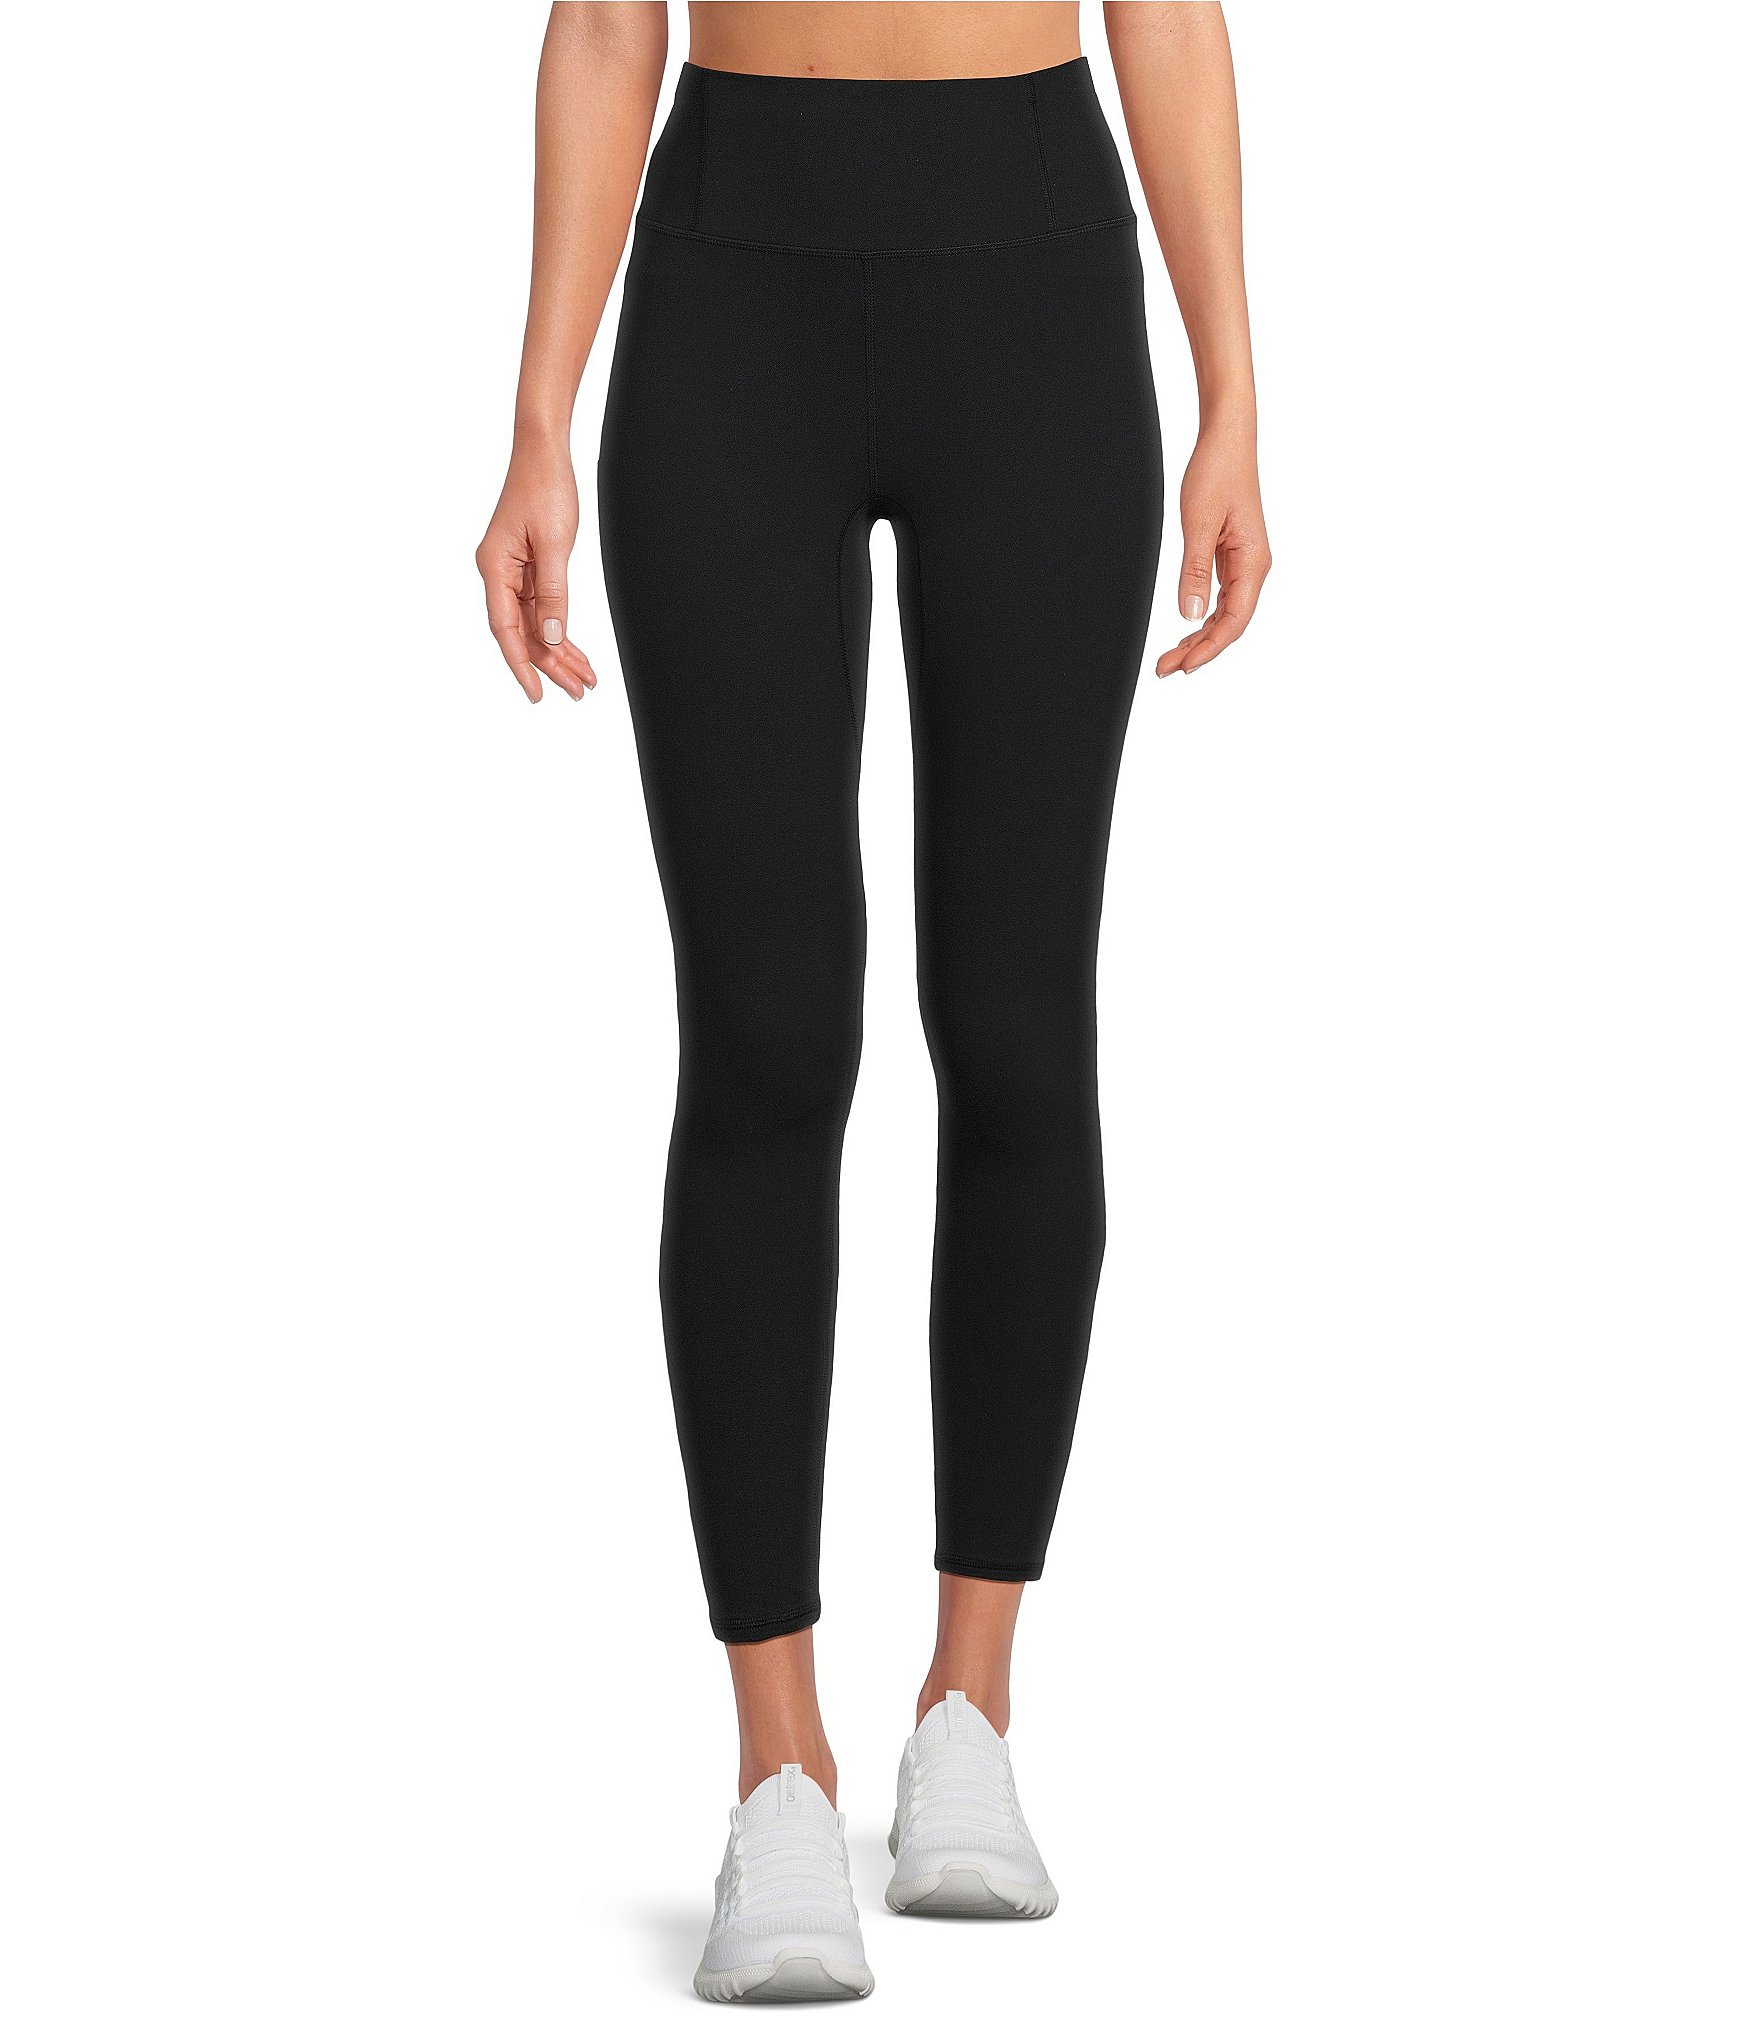 FP Movement - Out Of Your League Leggings by at Free People, Black, XS